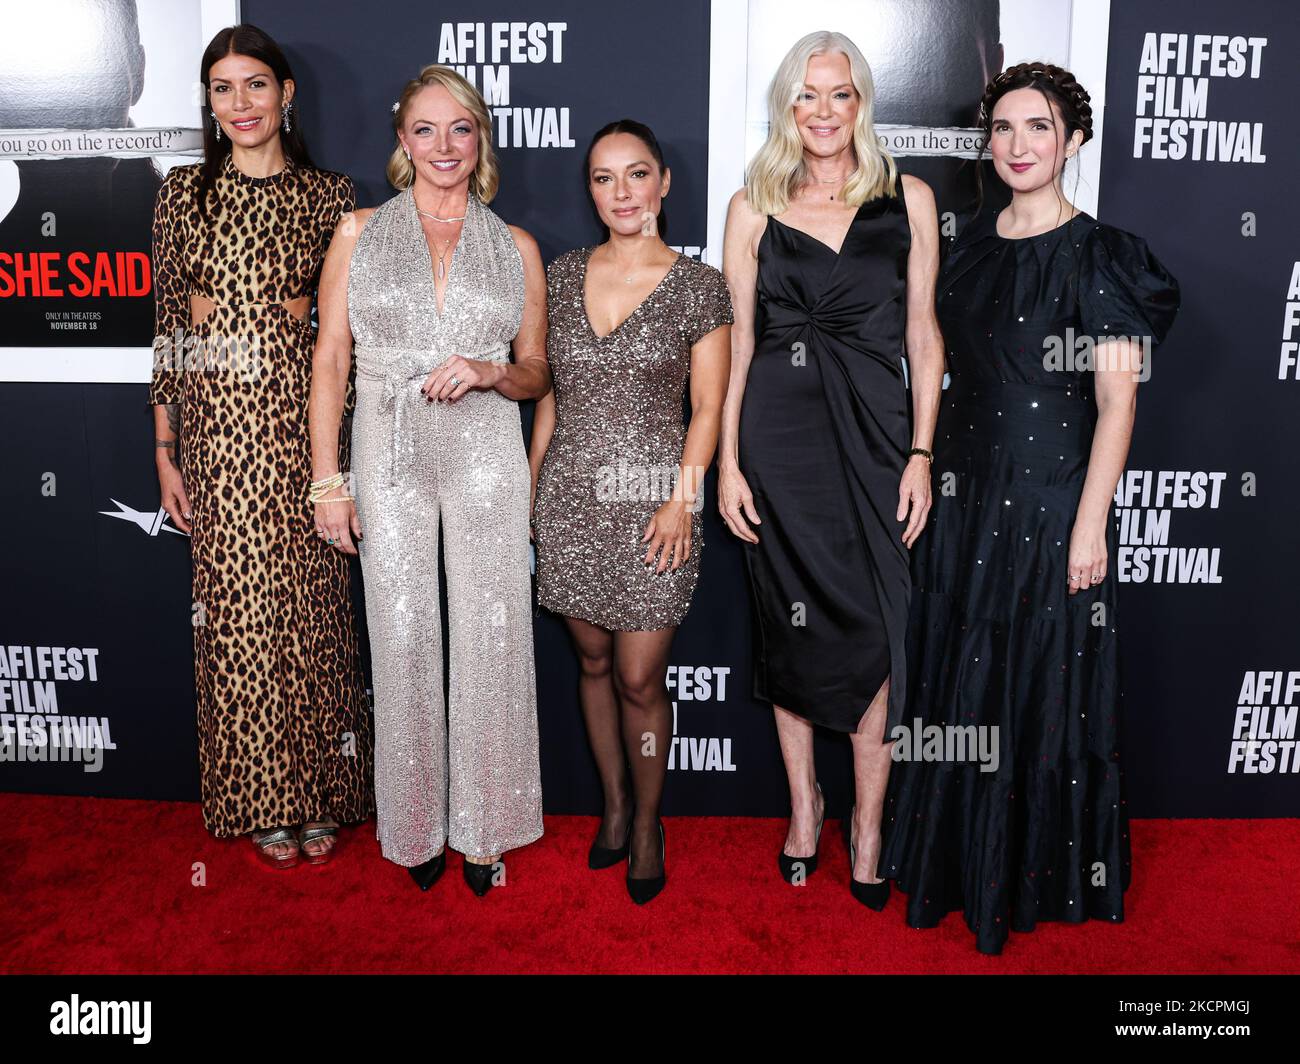 HOLLYWOOD, LOS ANGELES, CALIFORNIA, USA - NOVEMBER 04: Dawn Dunning, Louisette Geiss, Larissa Gomes, Caitlin Dulany and Sarah Ann Masse arrive at the 2022 AFI Fest - Special Screening Of Universal Pictures' 'She Said' held at the TCL Chinese Theatre IMAX on November 4, 2022 in Hollywood, Los Angeles, California, USA. (Photo by Xavier Collin/Image Press Agency) Stock Photo